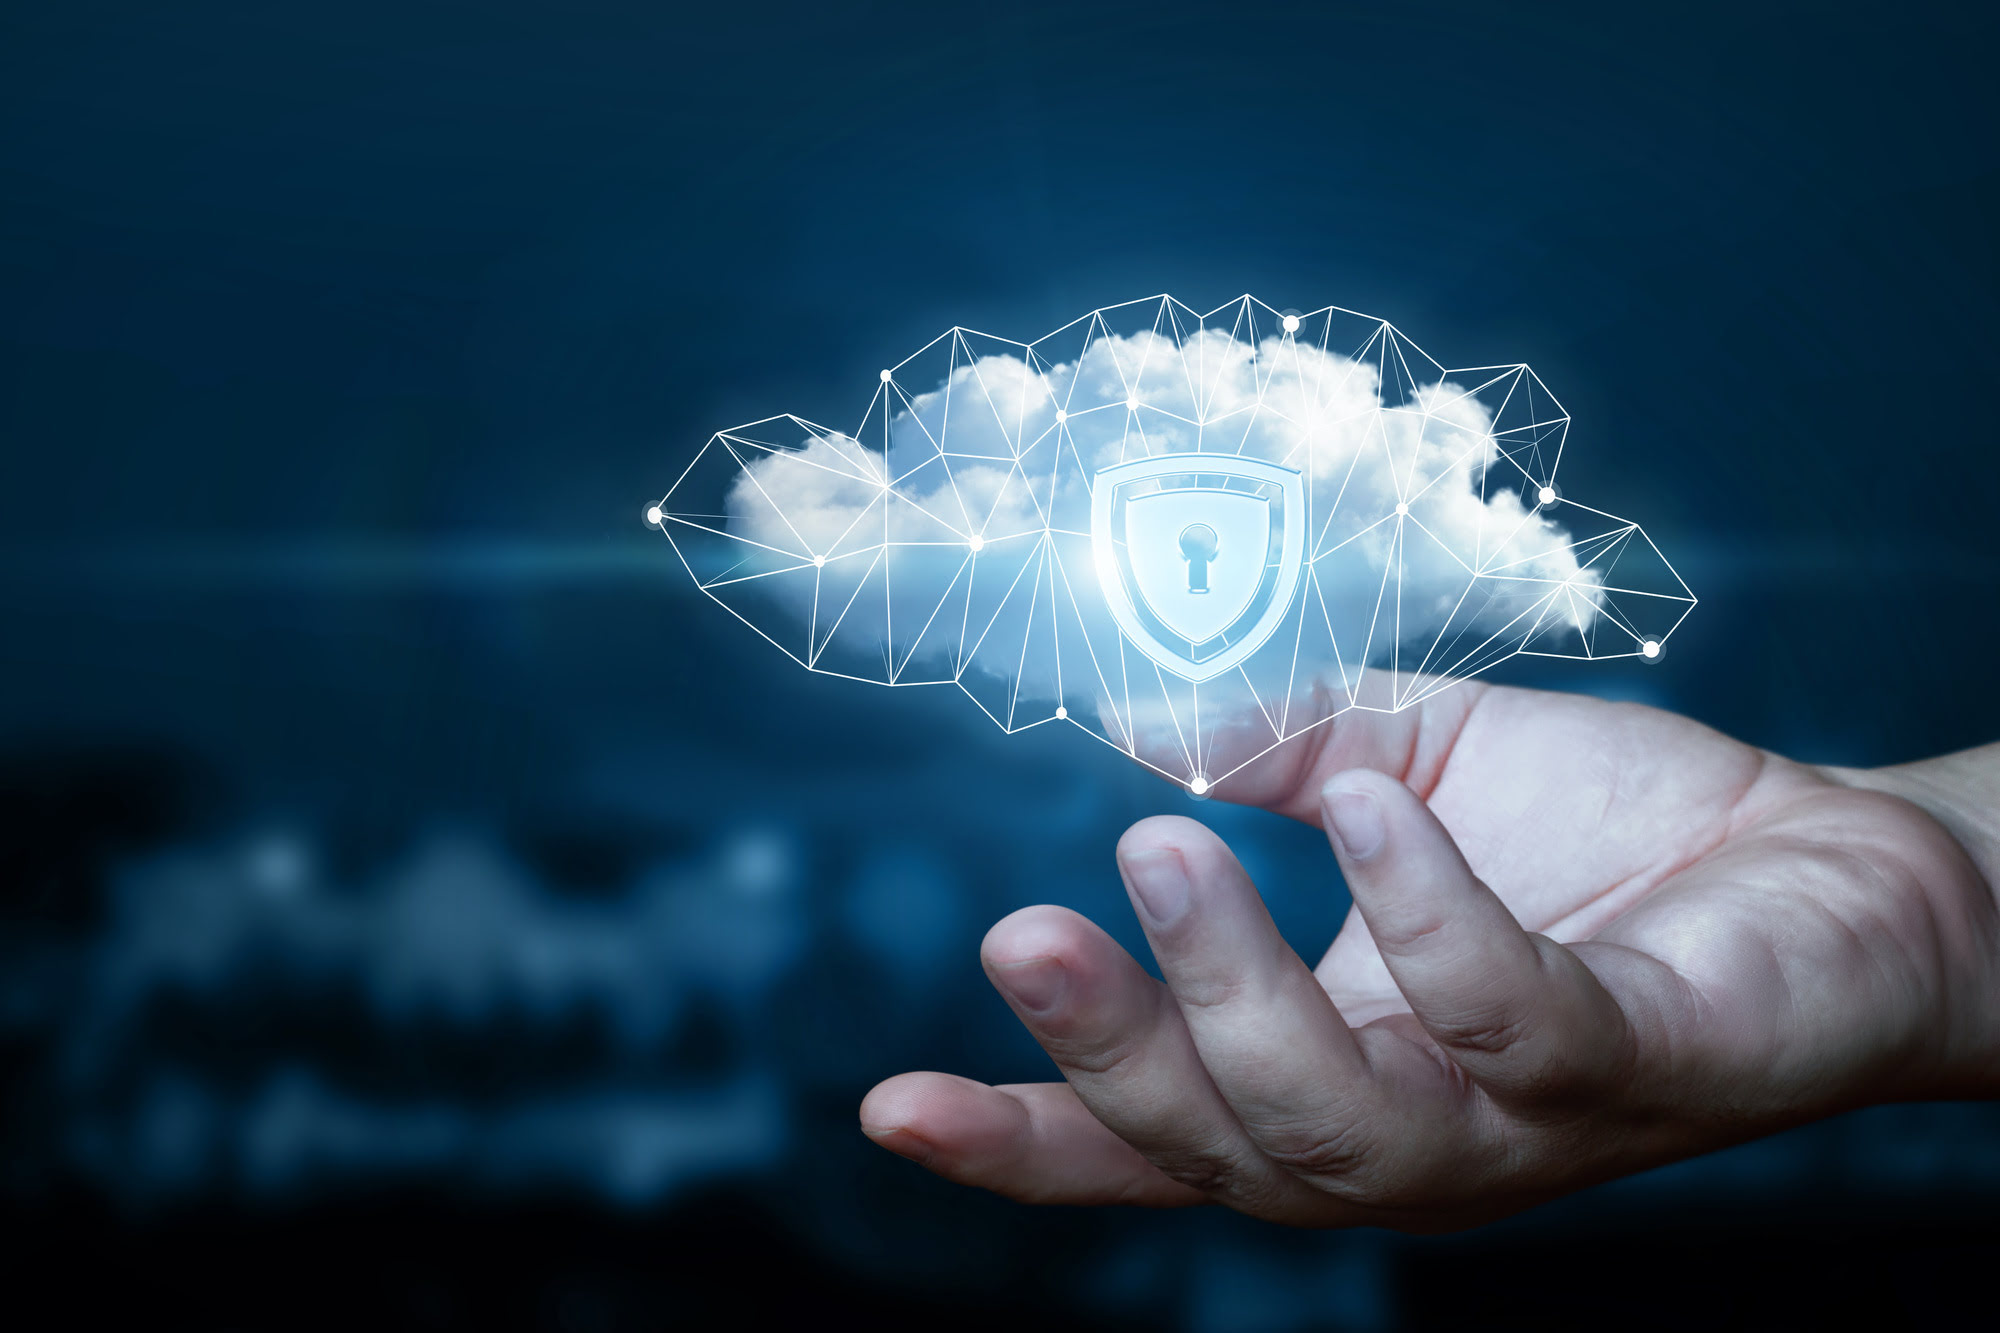 Private vs Public Cloud: Pros and Cons to Consider